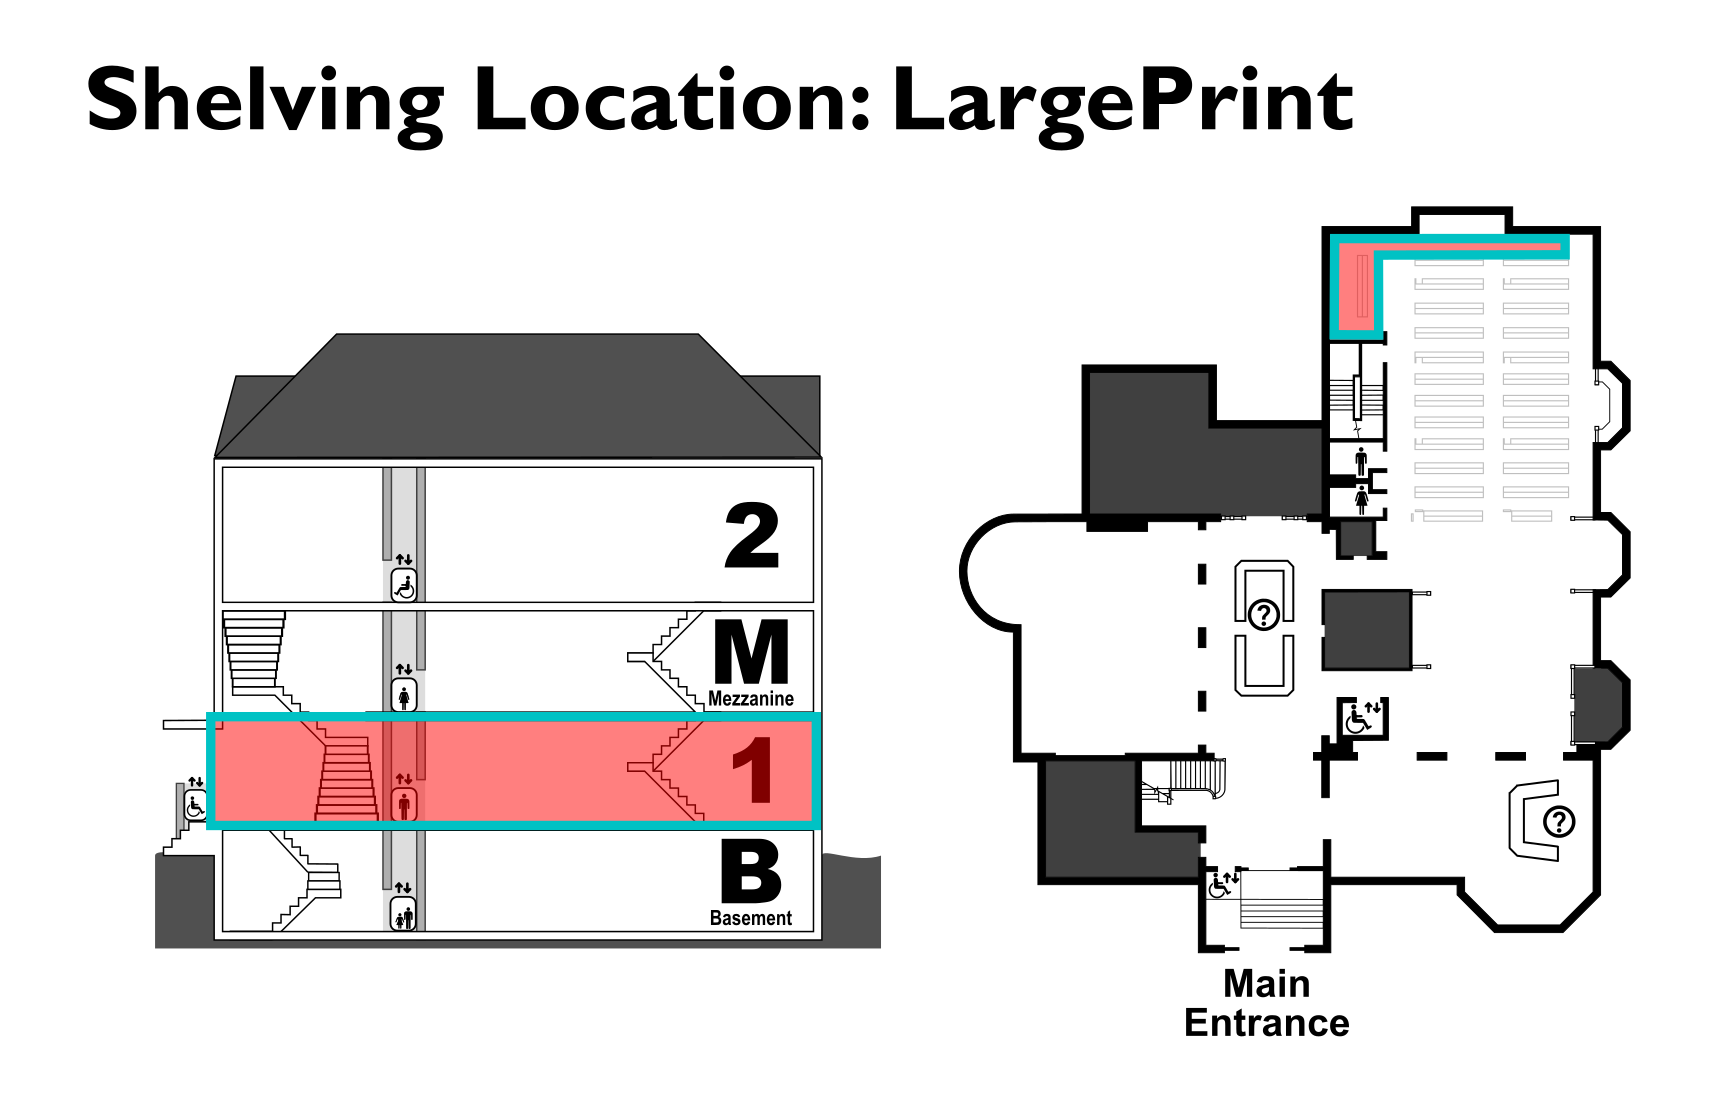 map showing the location of the Large Print shelving location